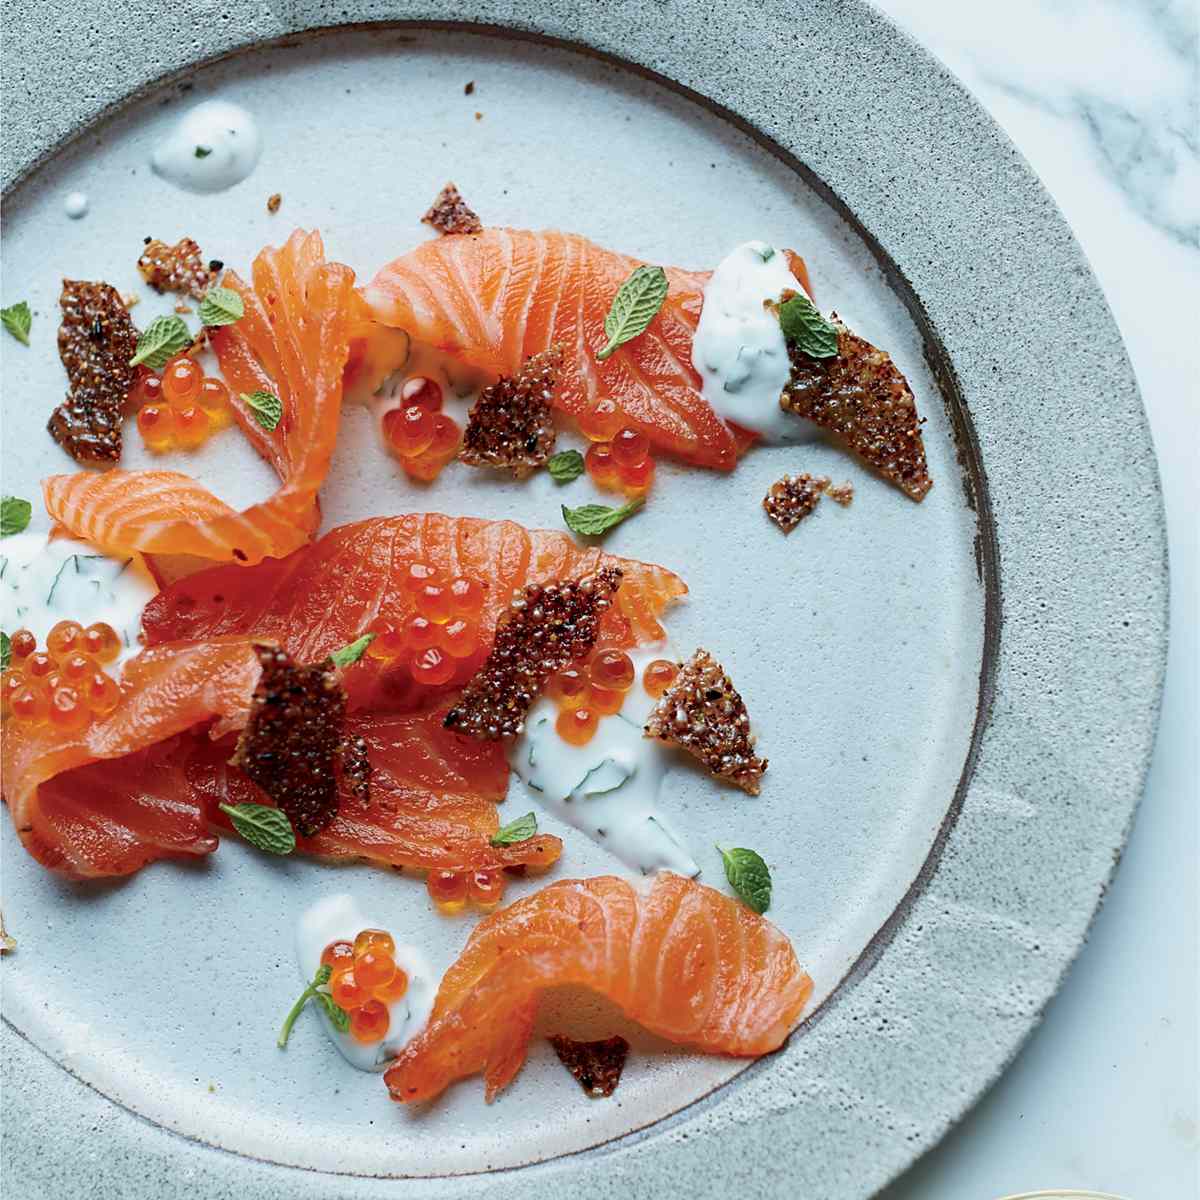 Quick-Cured Salmon with Salmon Cracklings